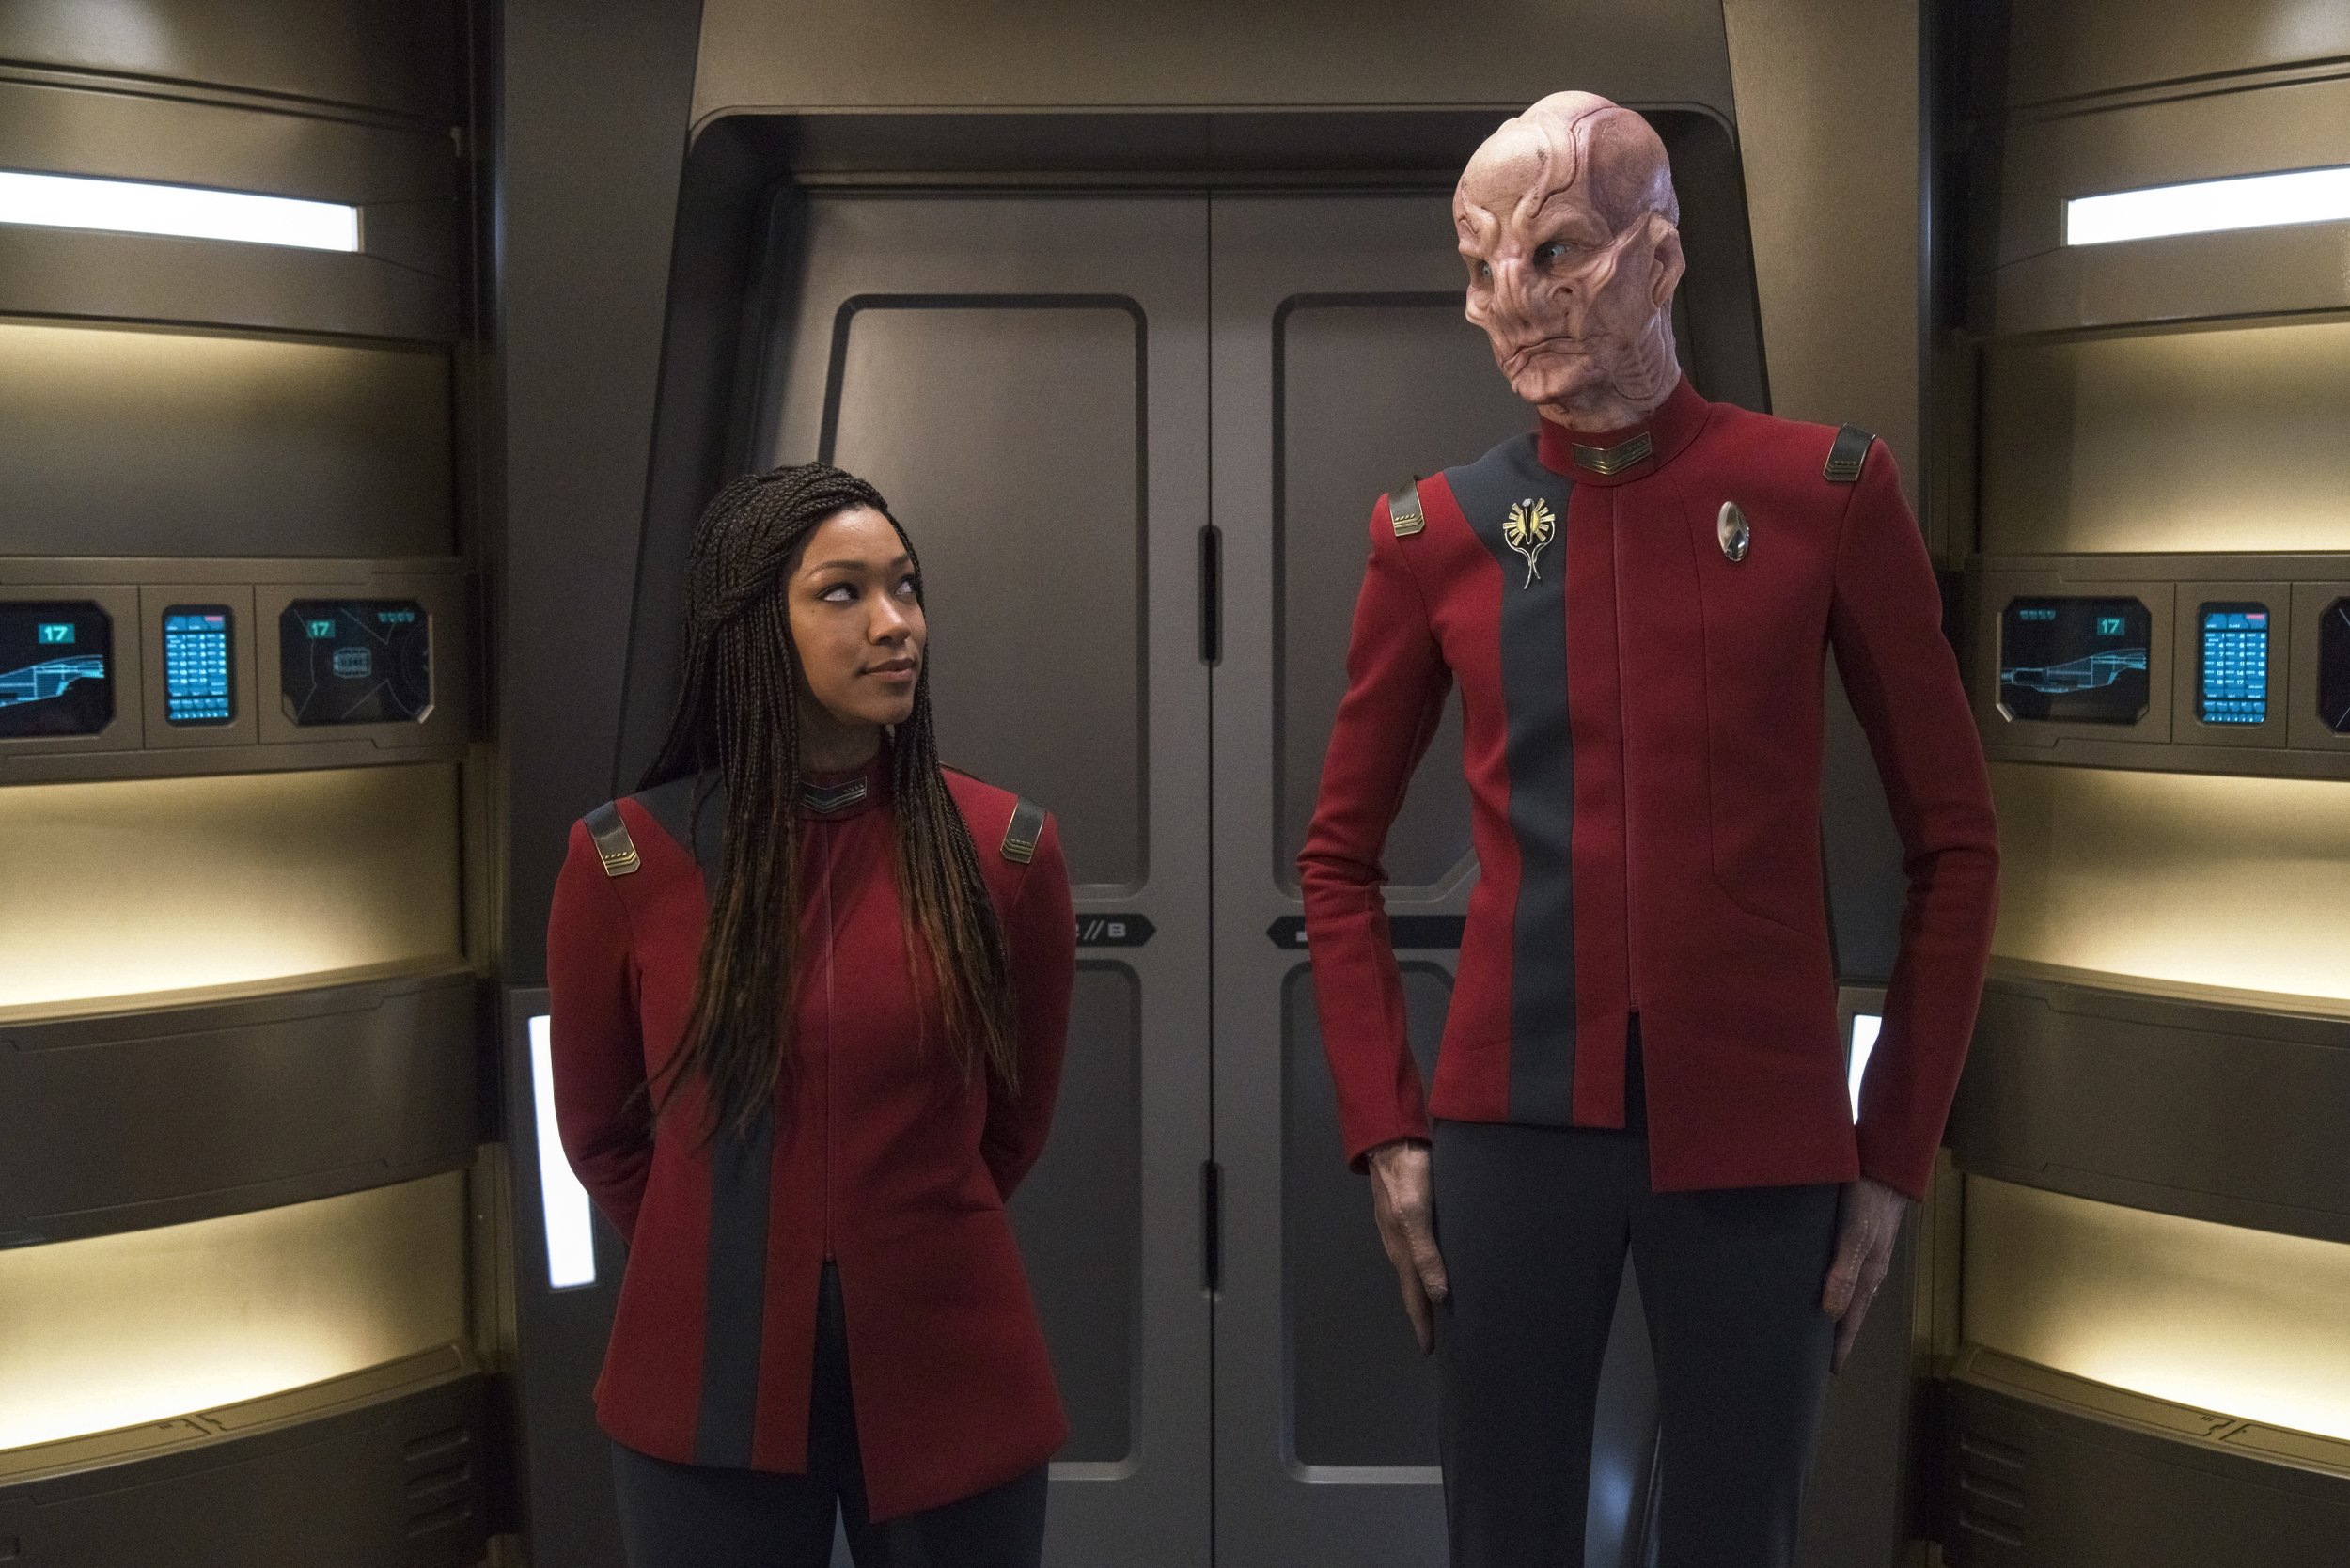   Pictured: Sonequa Martin Green as Burnham and Doug Jones as Saru of the Paramount+ original series STAR TREK: DISCOVERY. Photo Cr: Michael Gibson/Paramount+ (C) 2021 CBS Interactive. All Rights Reserved.  